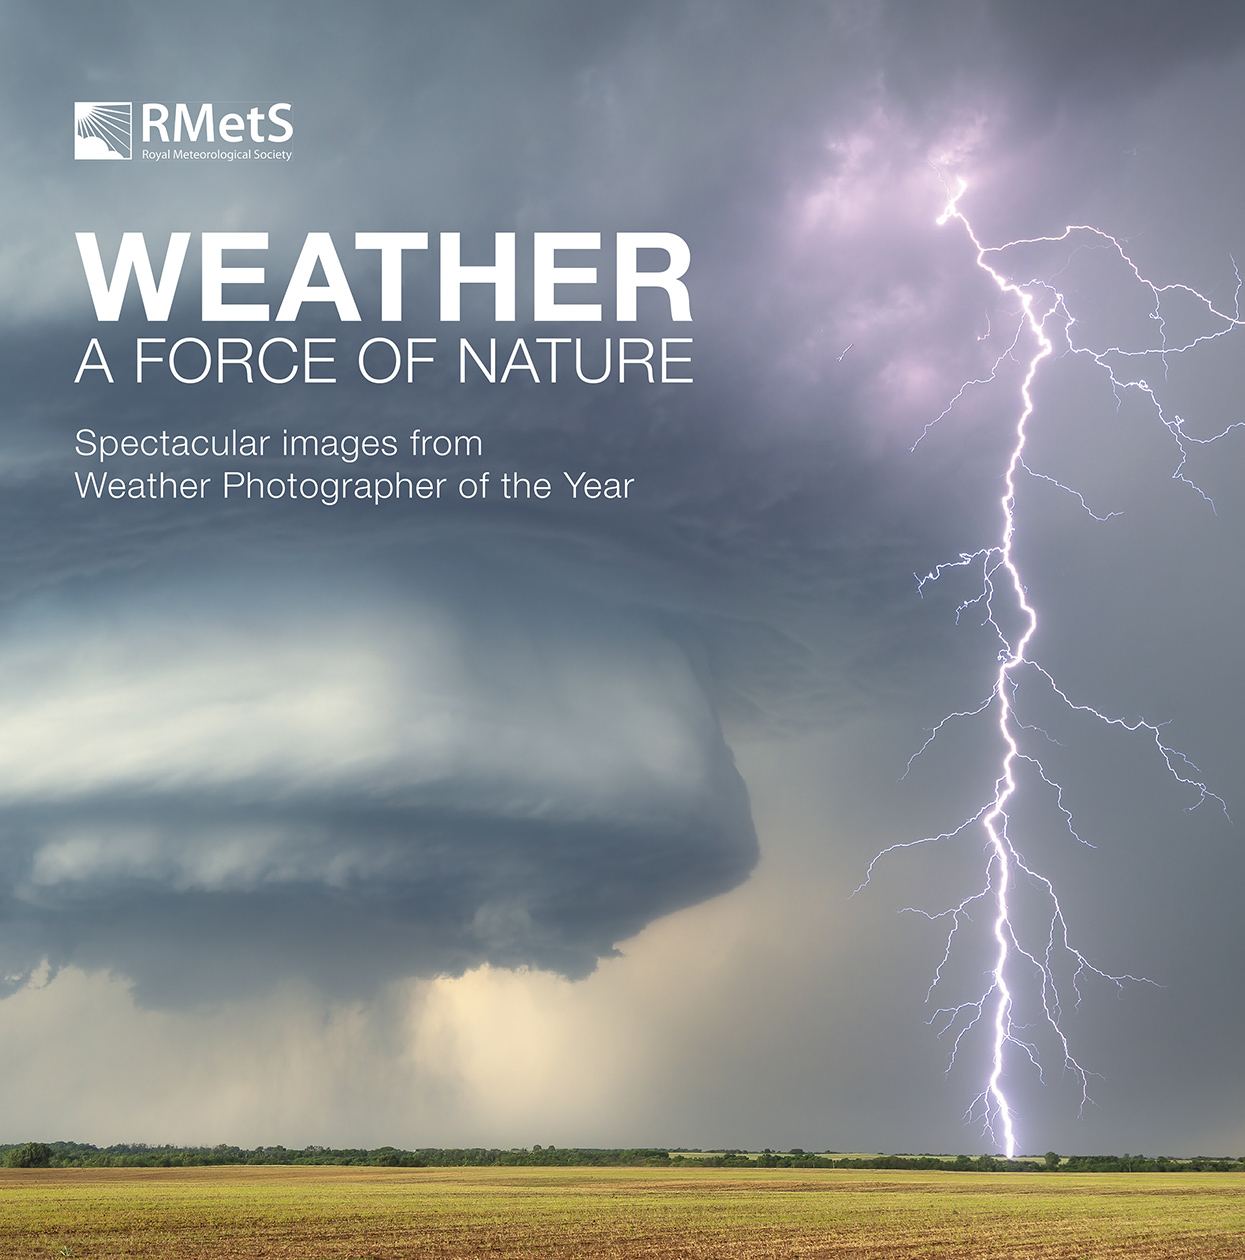 Cover of the book Weather, featuring a photo of a large, circular storm cloud above a yellow field, with a lightning strike hitting the ground.